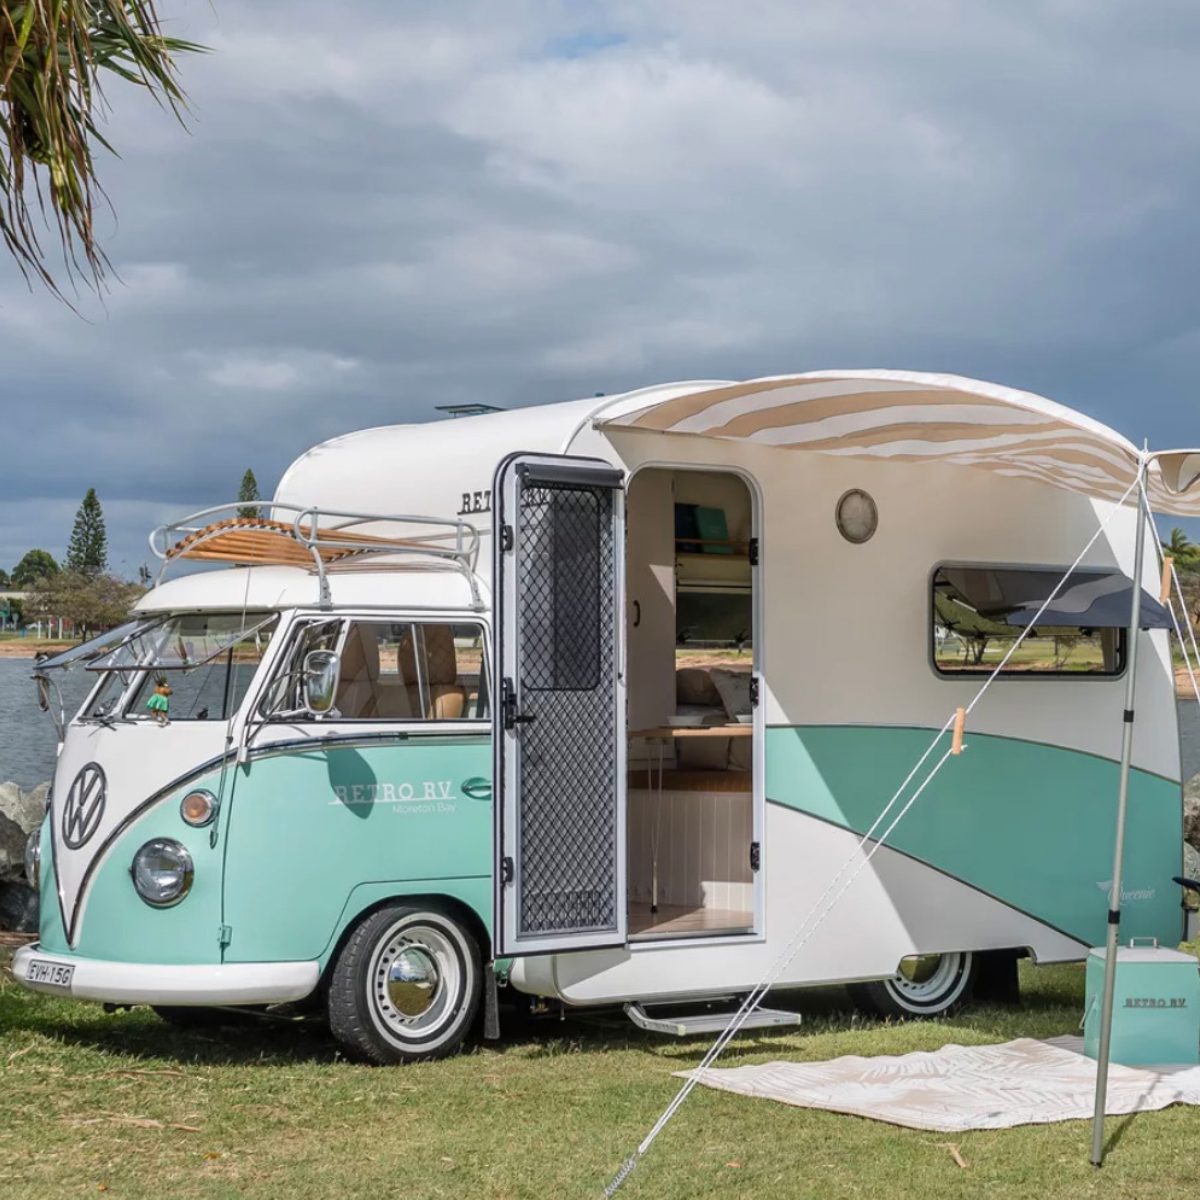 These Retro RV Campers Look Just Like A Classic VW Bus